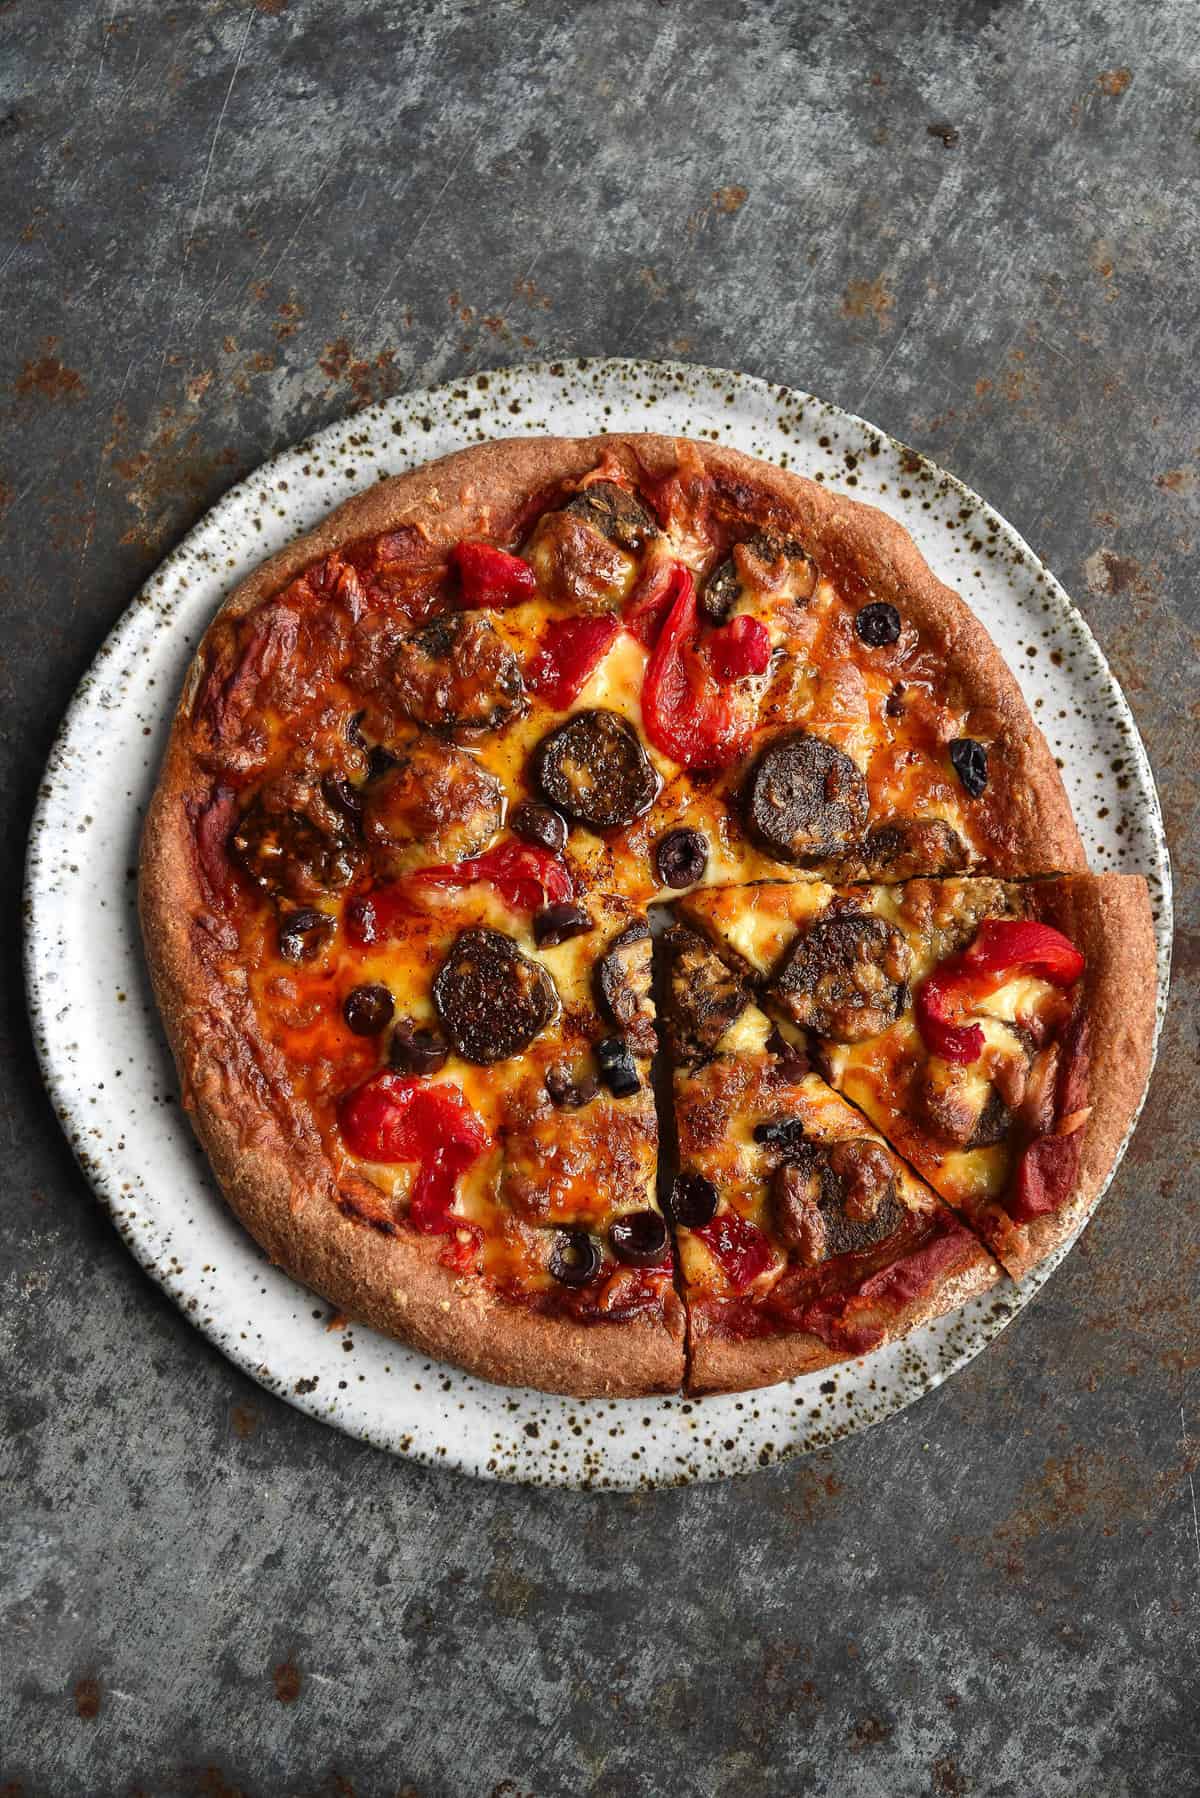 An aerial image of a gluten free pizza topped with low FODMAP pizza sauce, vegan sausage and red capsicums. The pizza sits on a white speckled ceramic plate atop a steel backdrop.